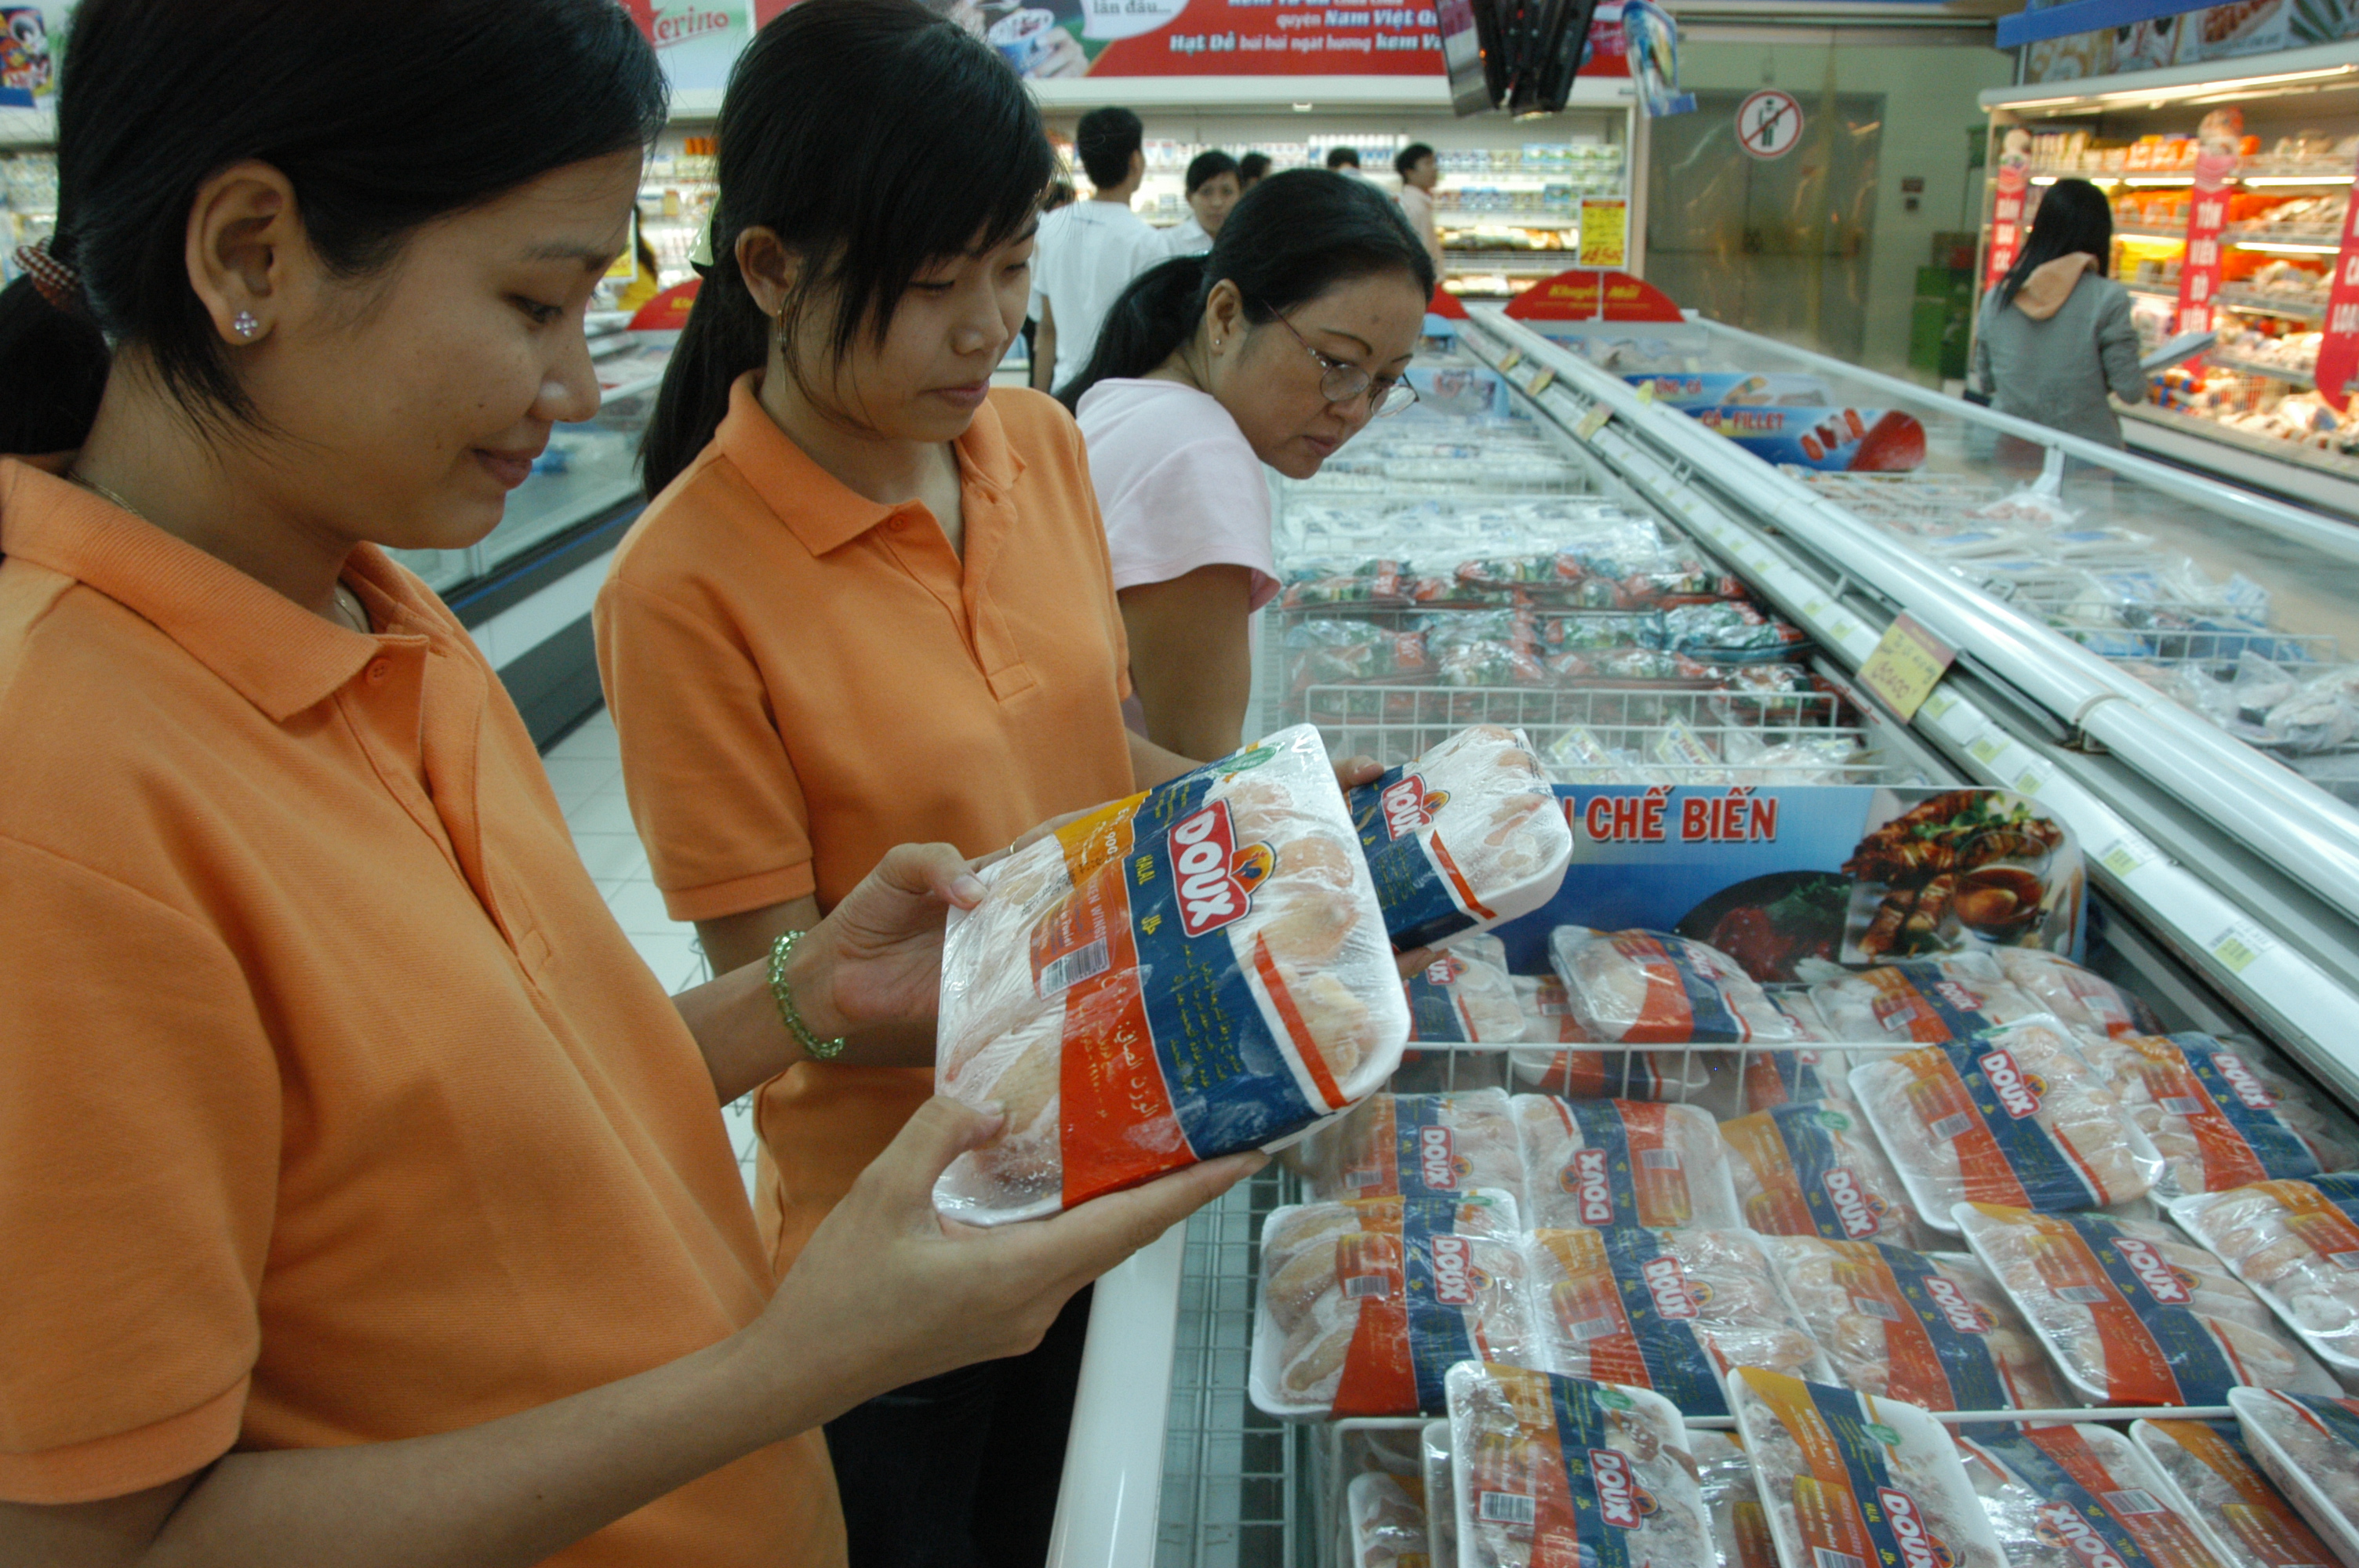 Insiders skeptical over throwaway prices of US chicken imports in Vietnam